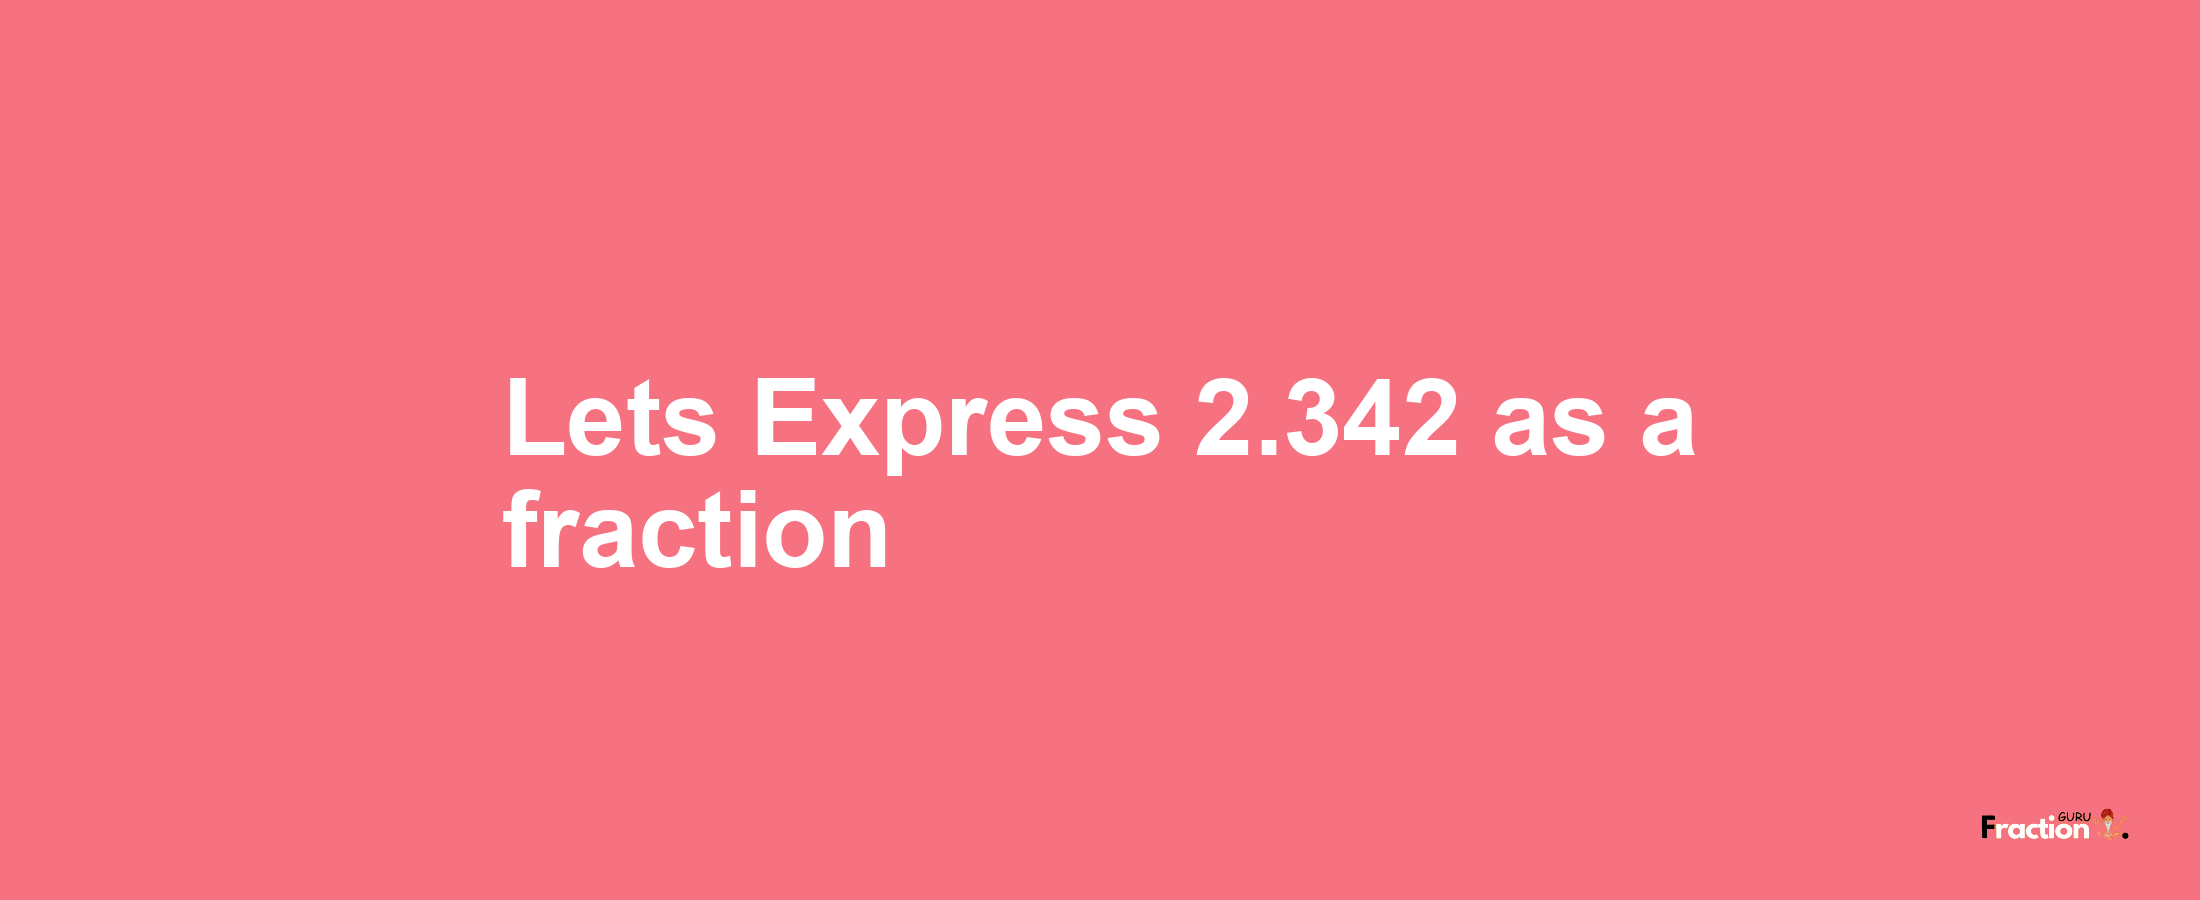 Lets Express 2.342 as afraction